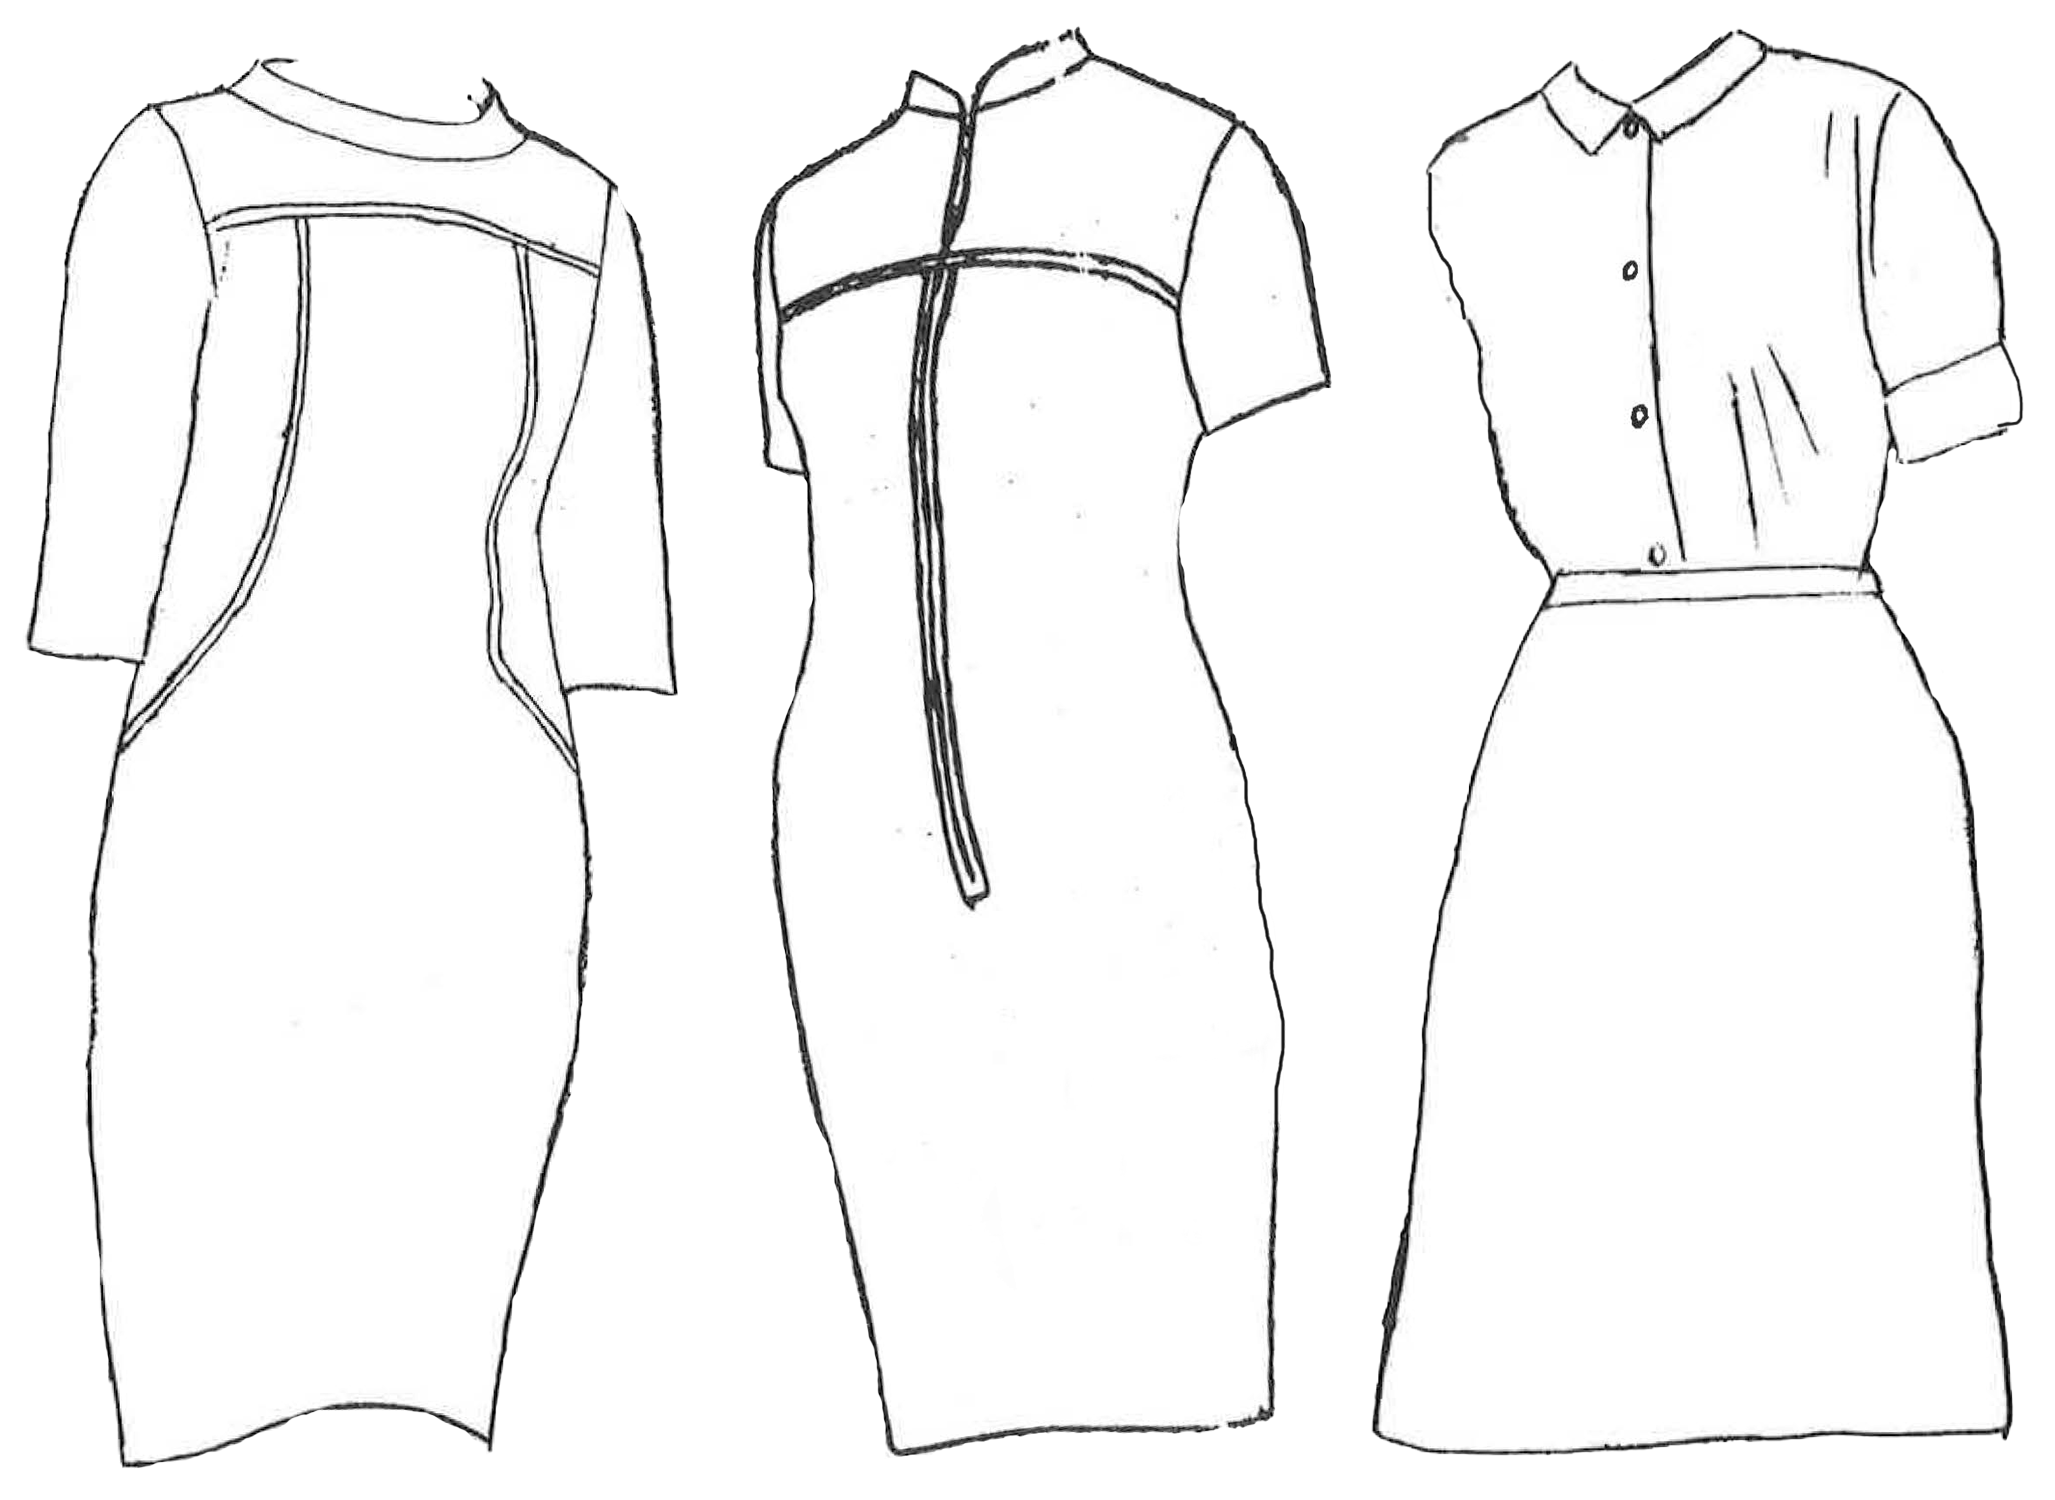 sketches of two dresses and a shirt with blouse